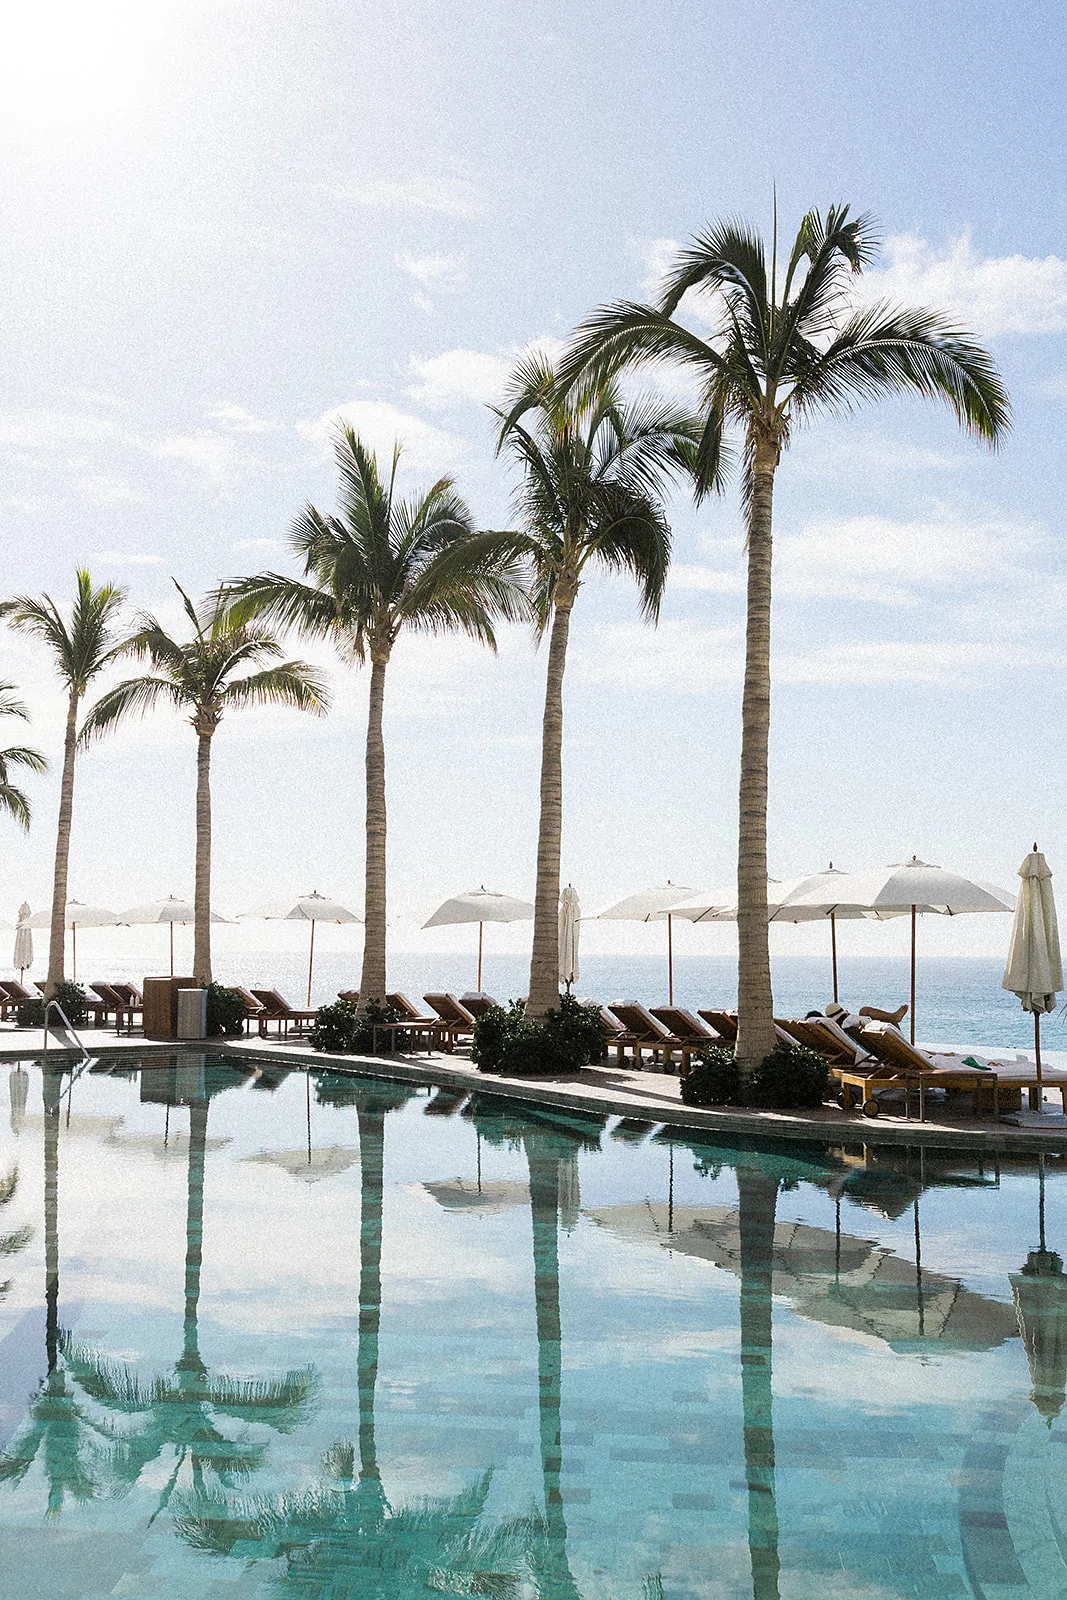 A peek at the pool and chairs along the beach view at the Grand Velas Los Cabos Wedding venue